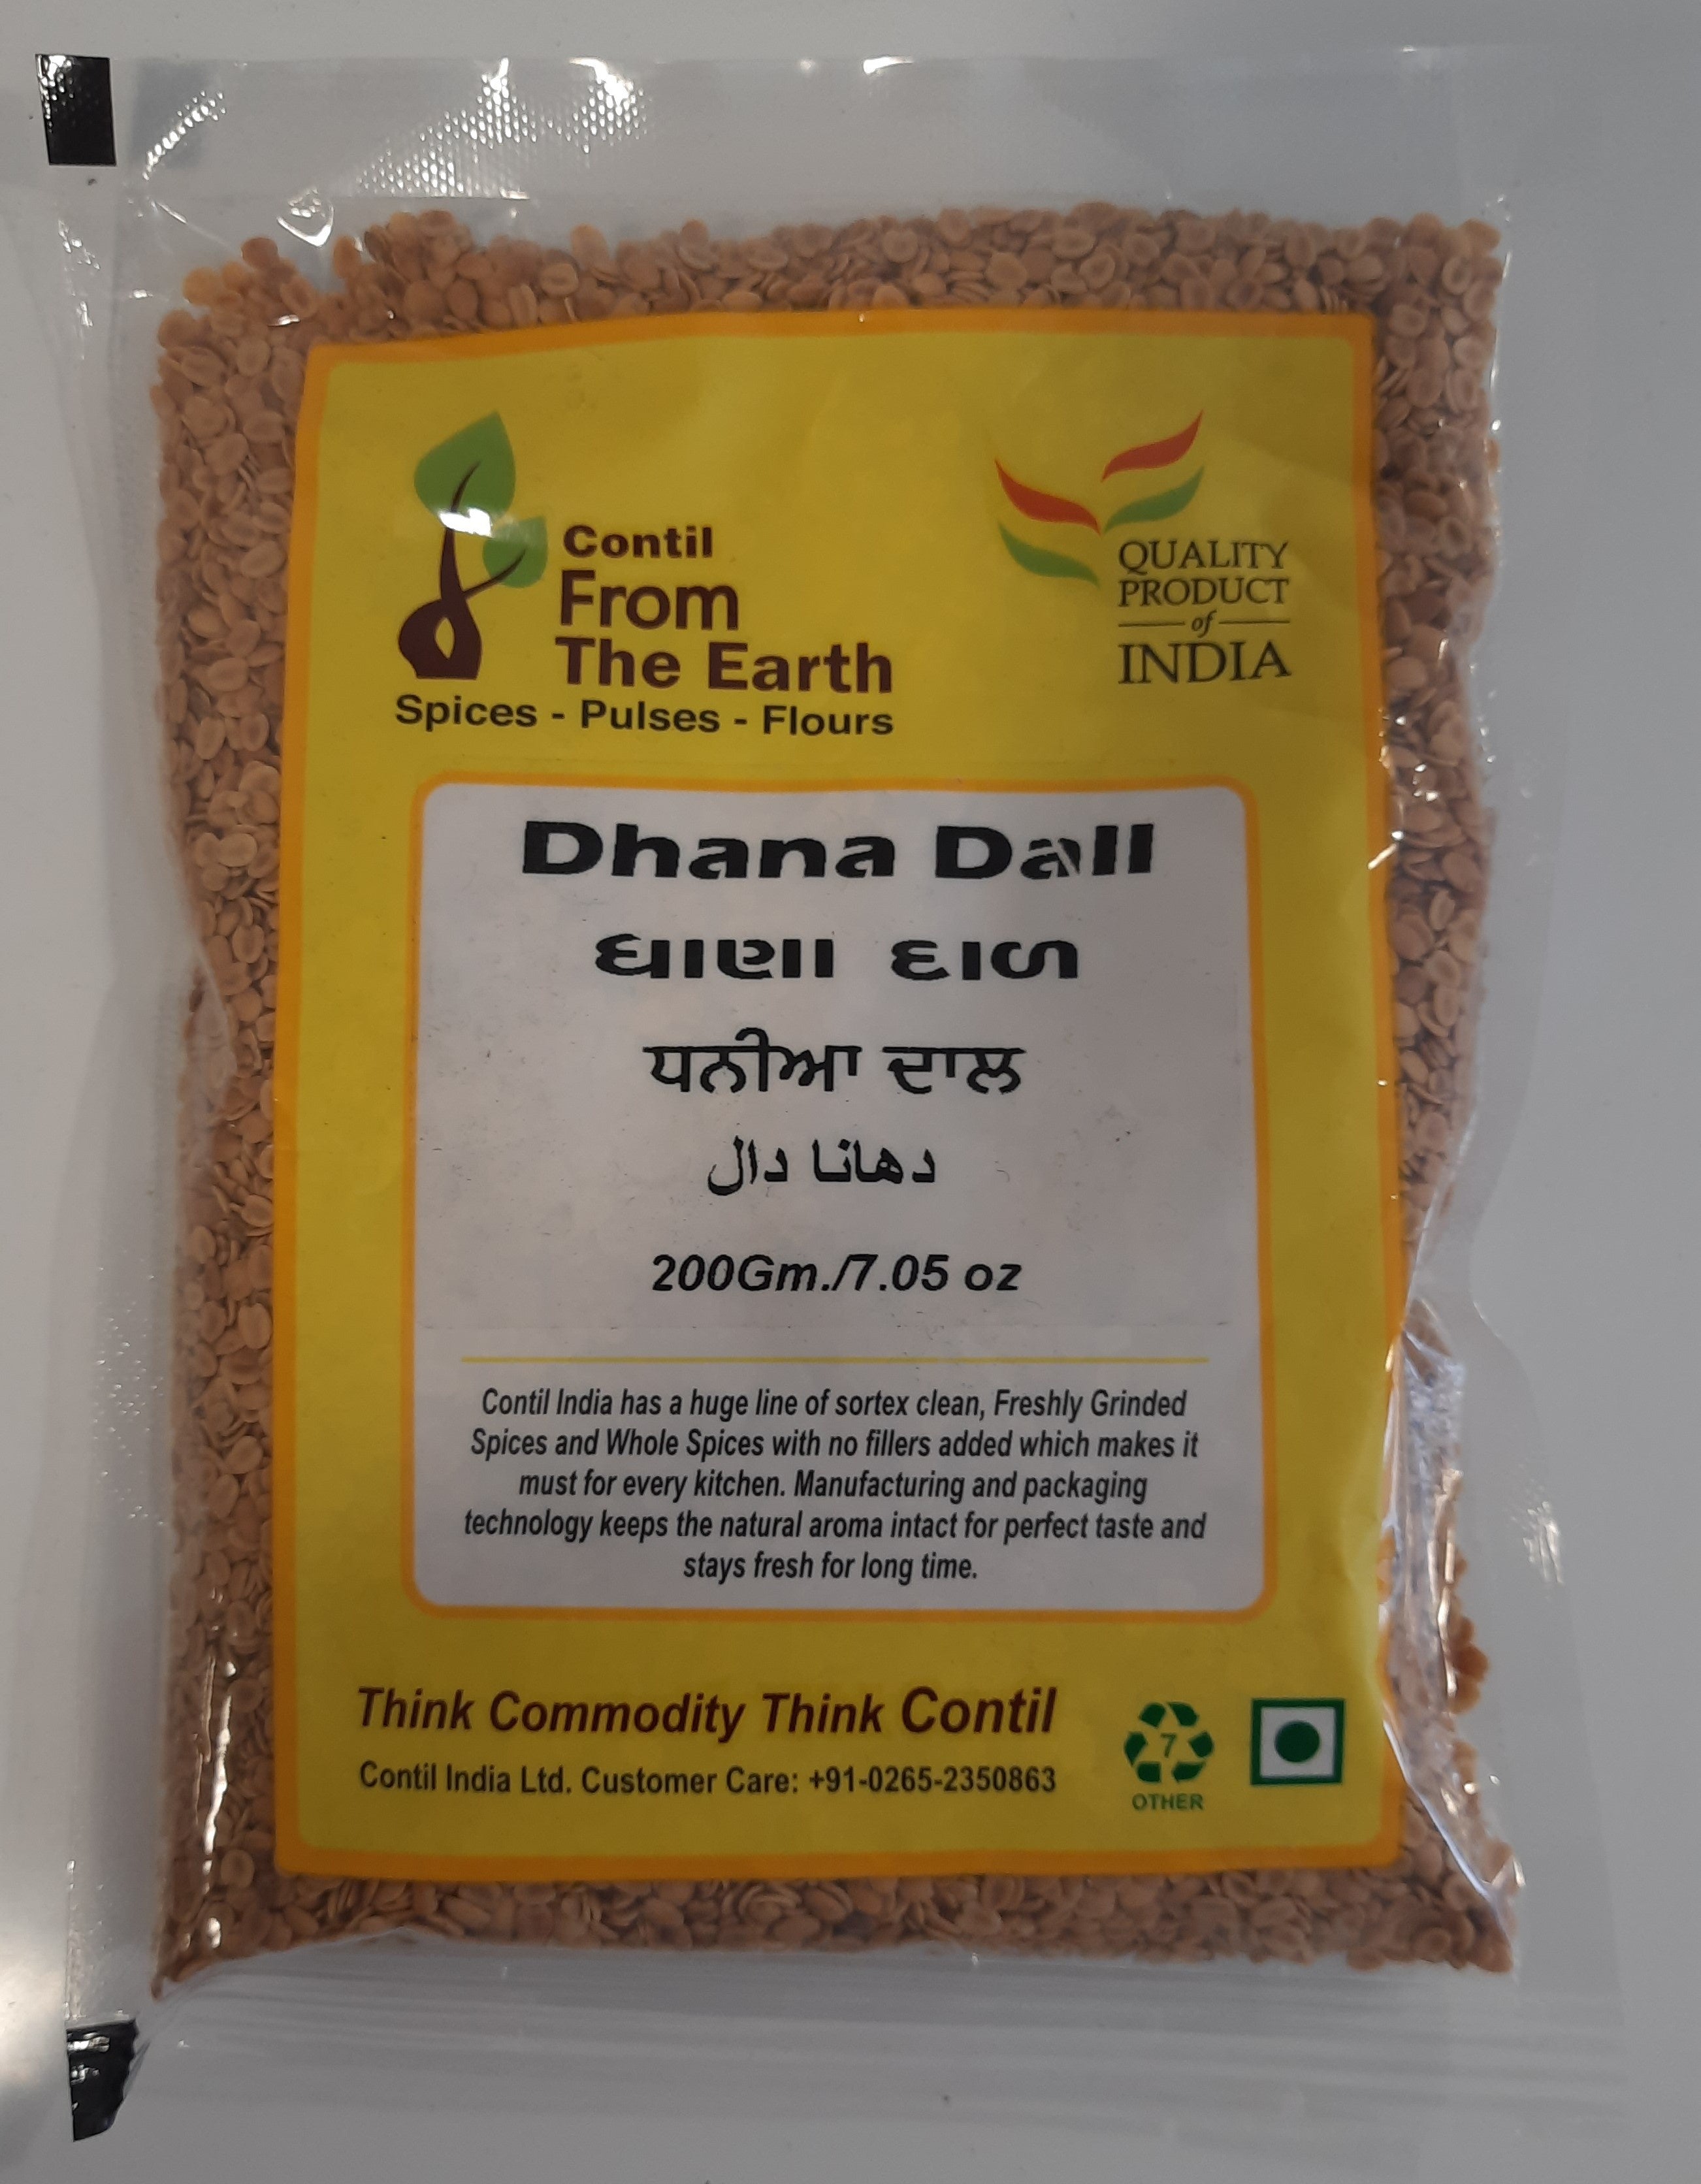 From the Earth - Dhana Dal 200g